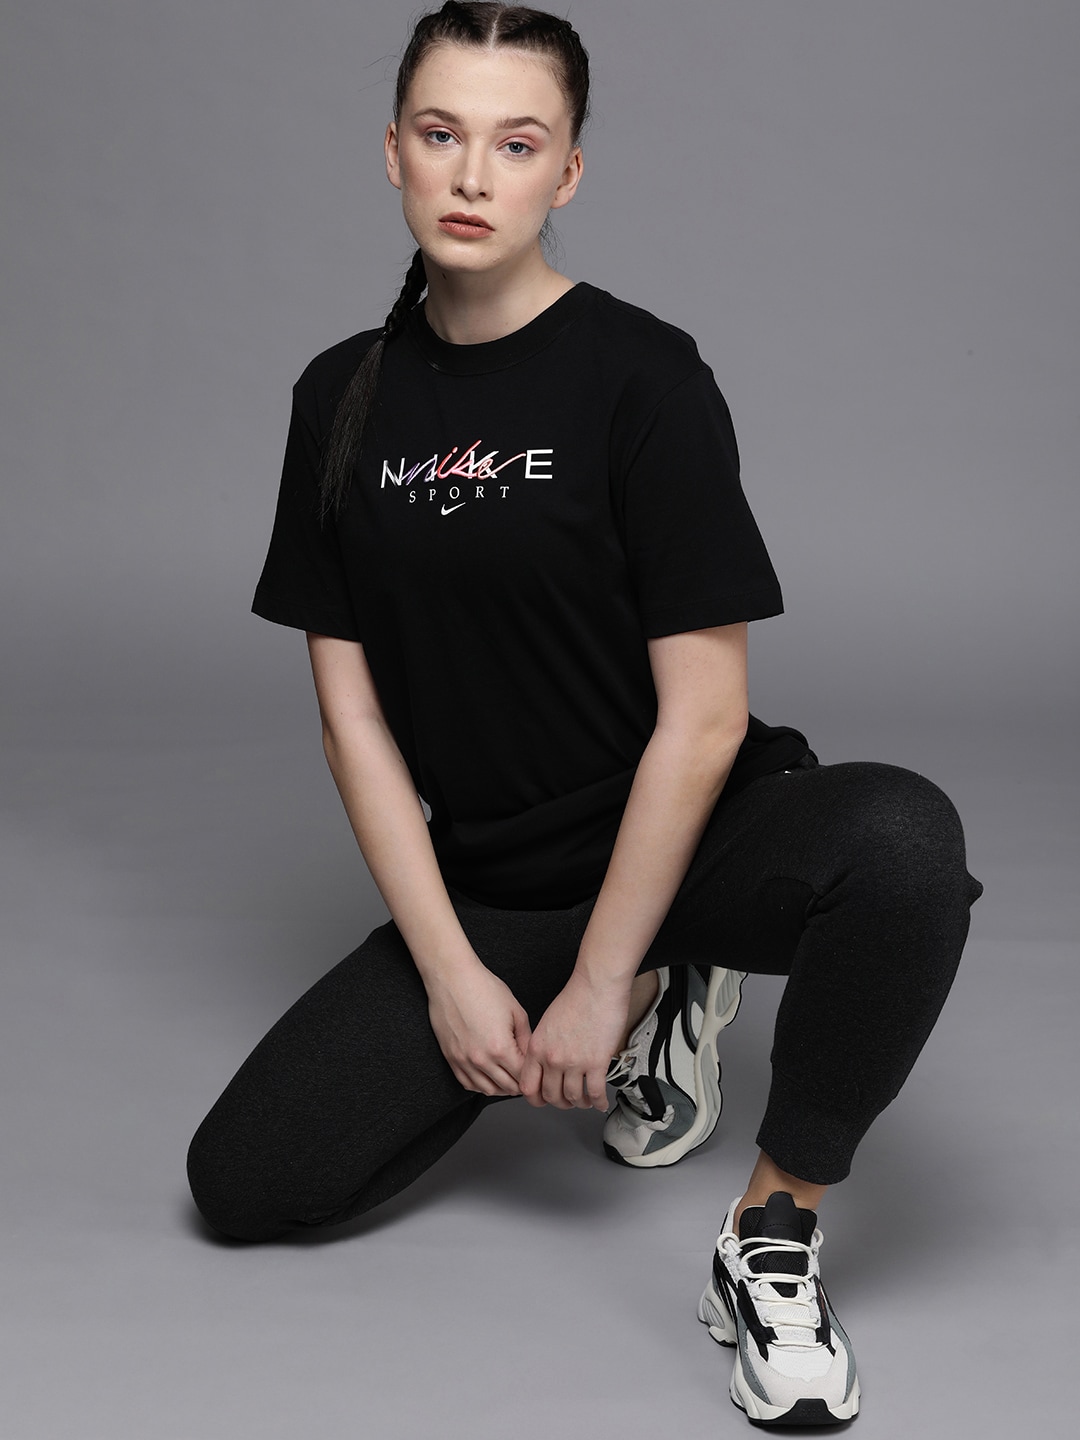 Nike Black Brand Logo Printed AS NSW Boyfriend Craft Pure Cotton Gym Pure Cotton T-shirt Price in India